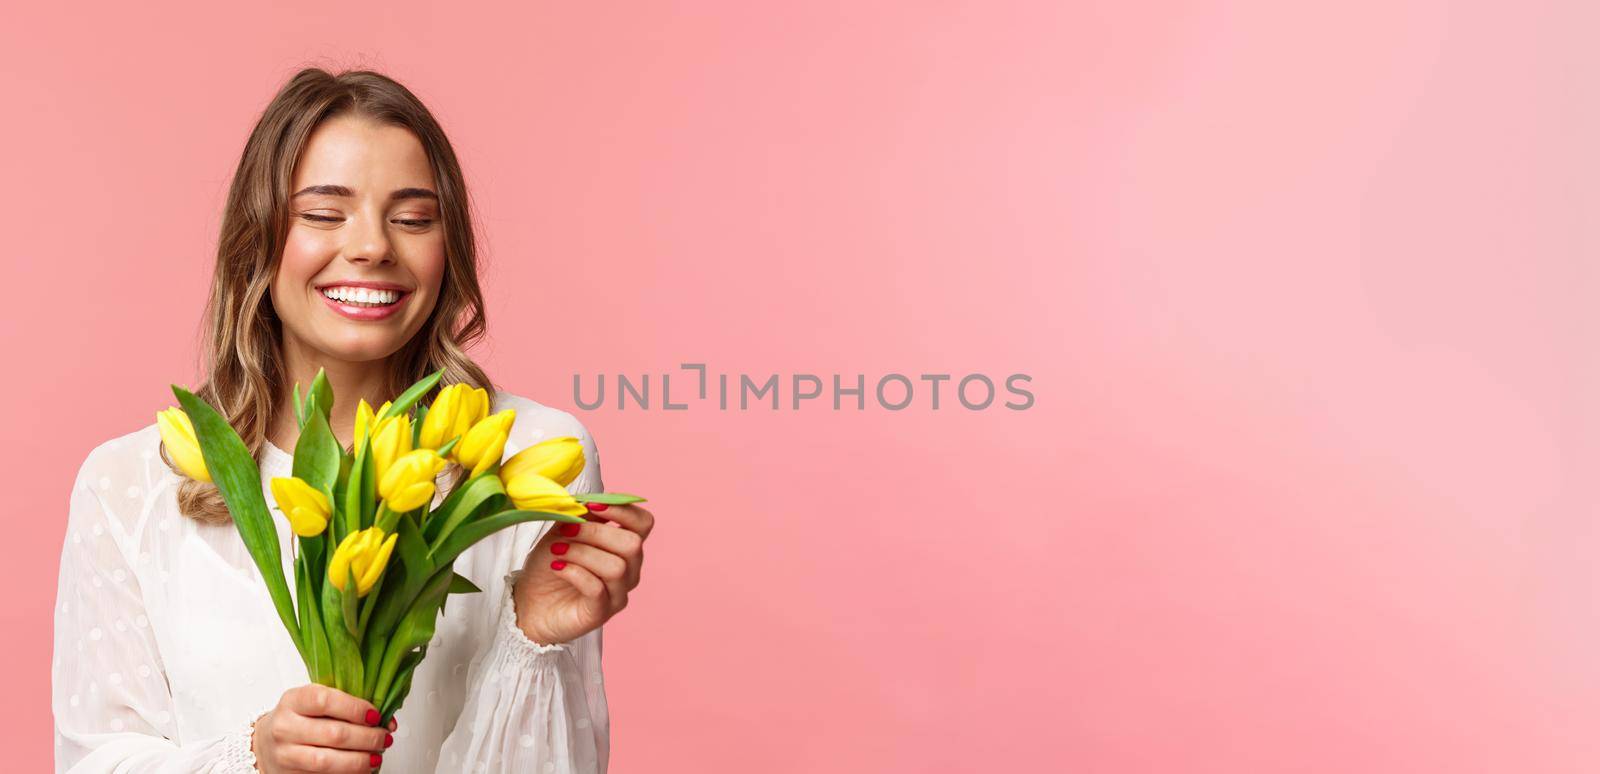 Spring, happiness and celebration concept. Close-up portrait of lovely romantic smiling girl touching petal of yellow tulip, holding flowers, receive bouquet on date, standing pink background.